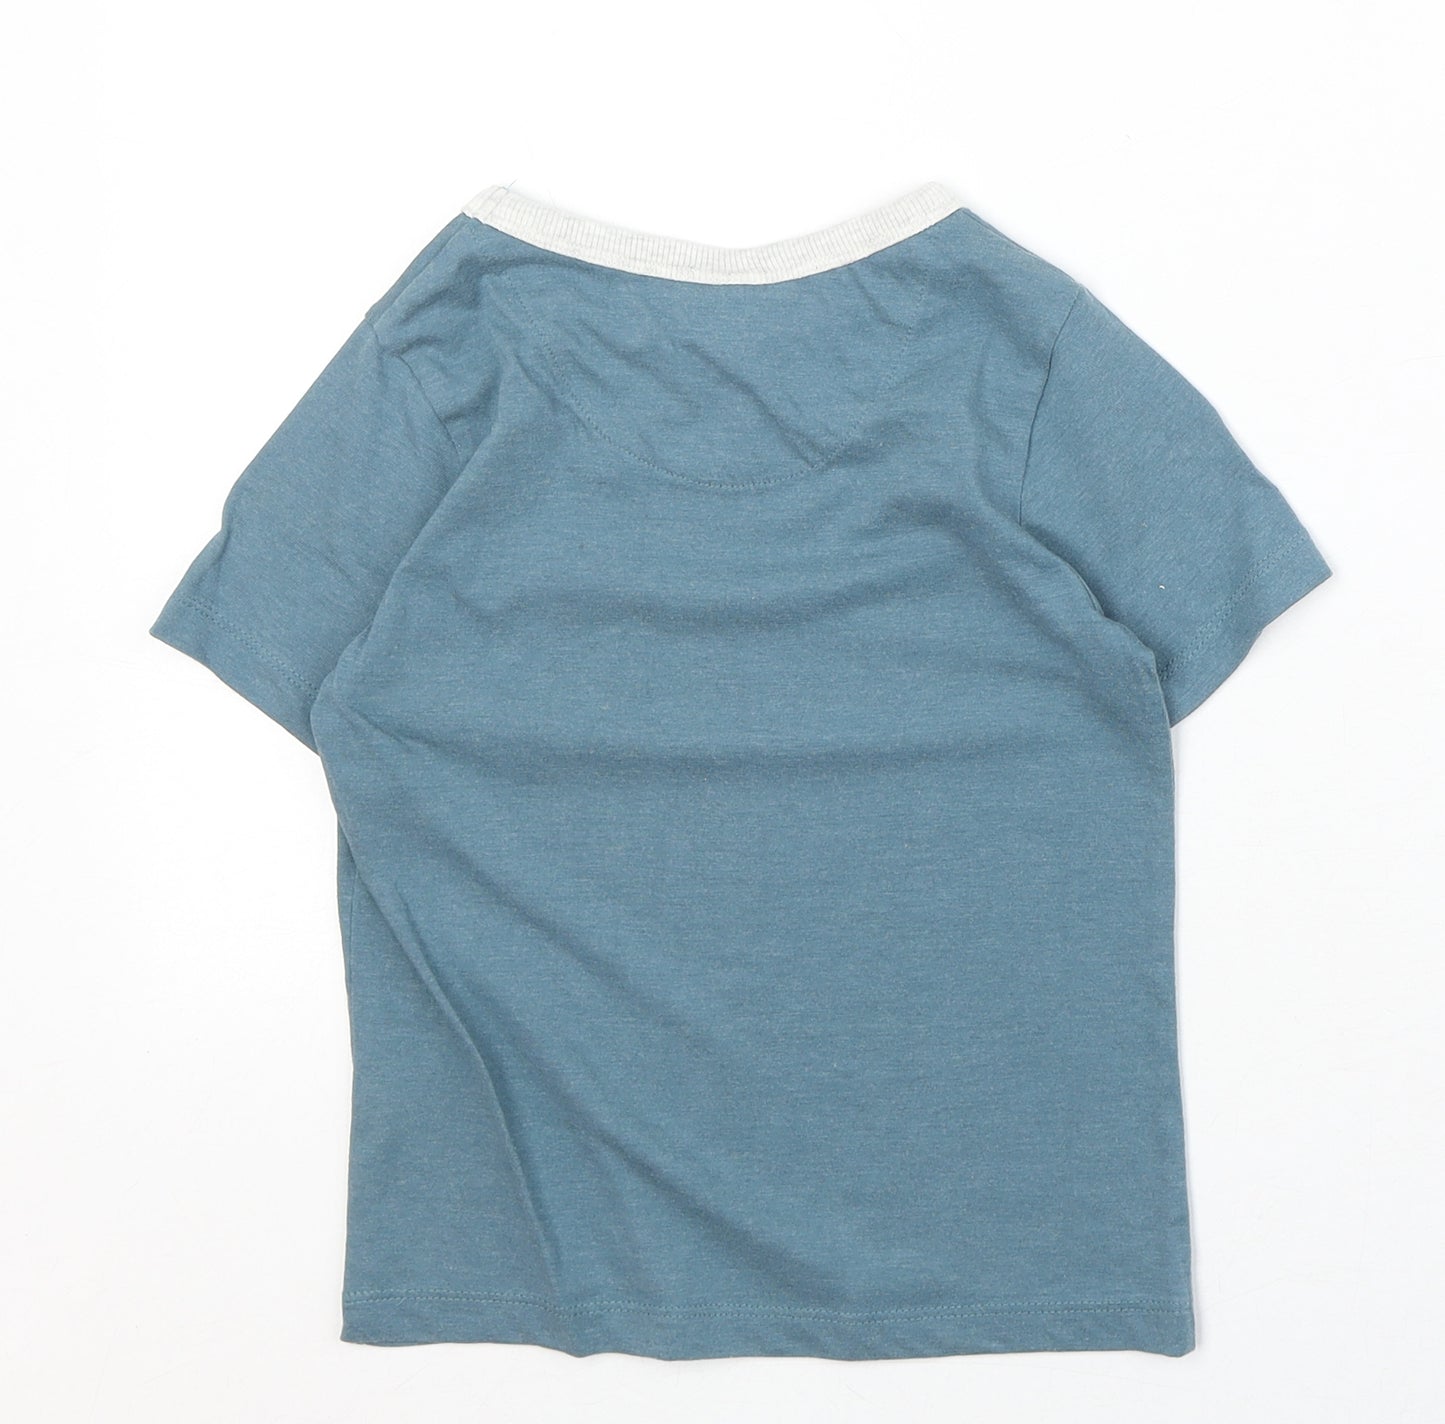 Jack Green Boys Blue Cotton Basic T-Shirt Size 5-6 Years Round Neck Pullover